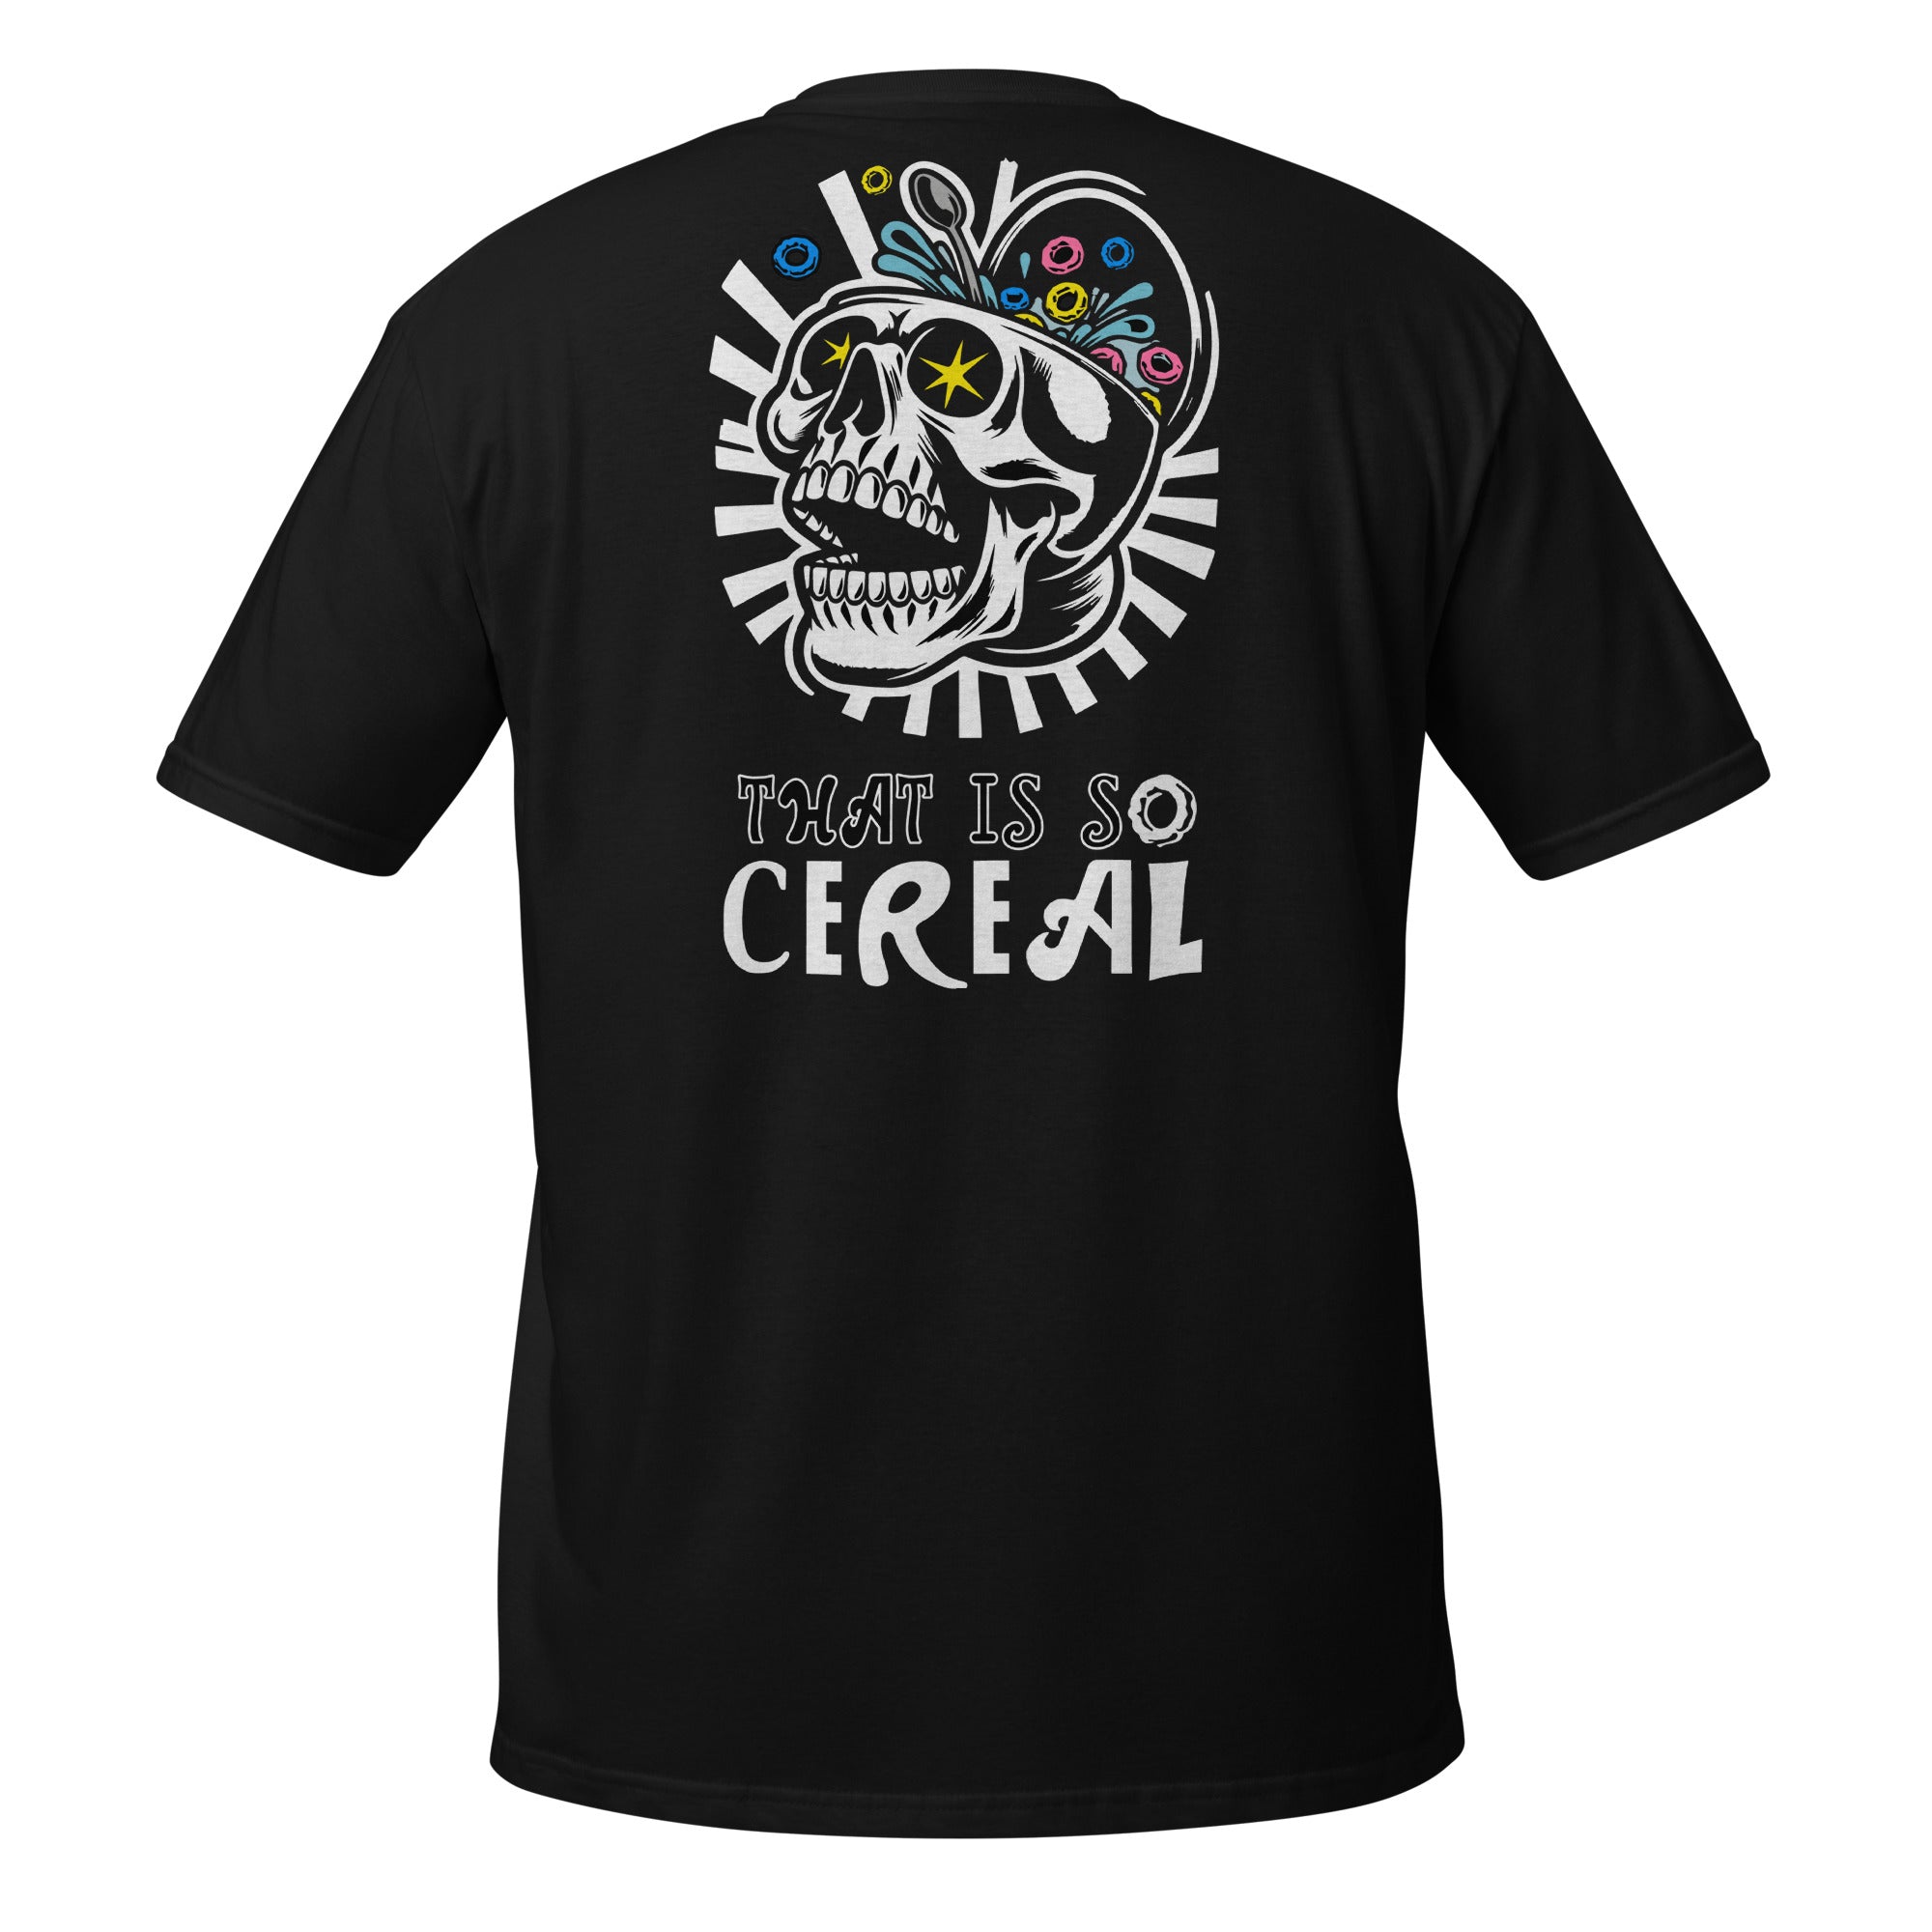 So Cereal T-Shirt